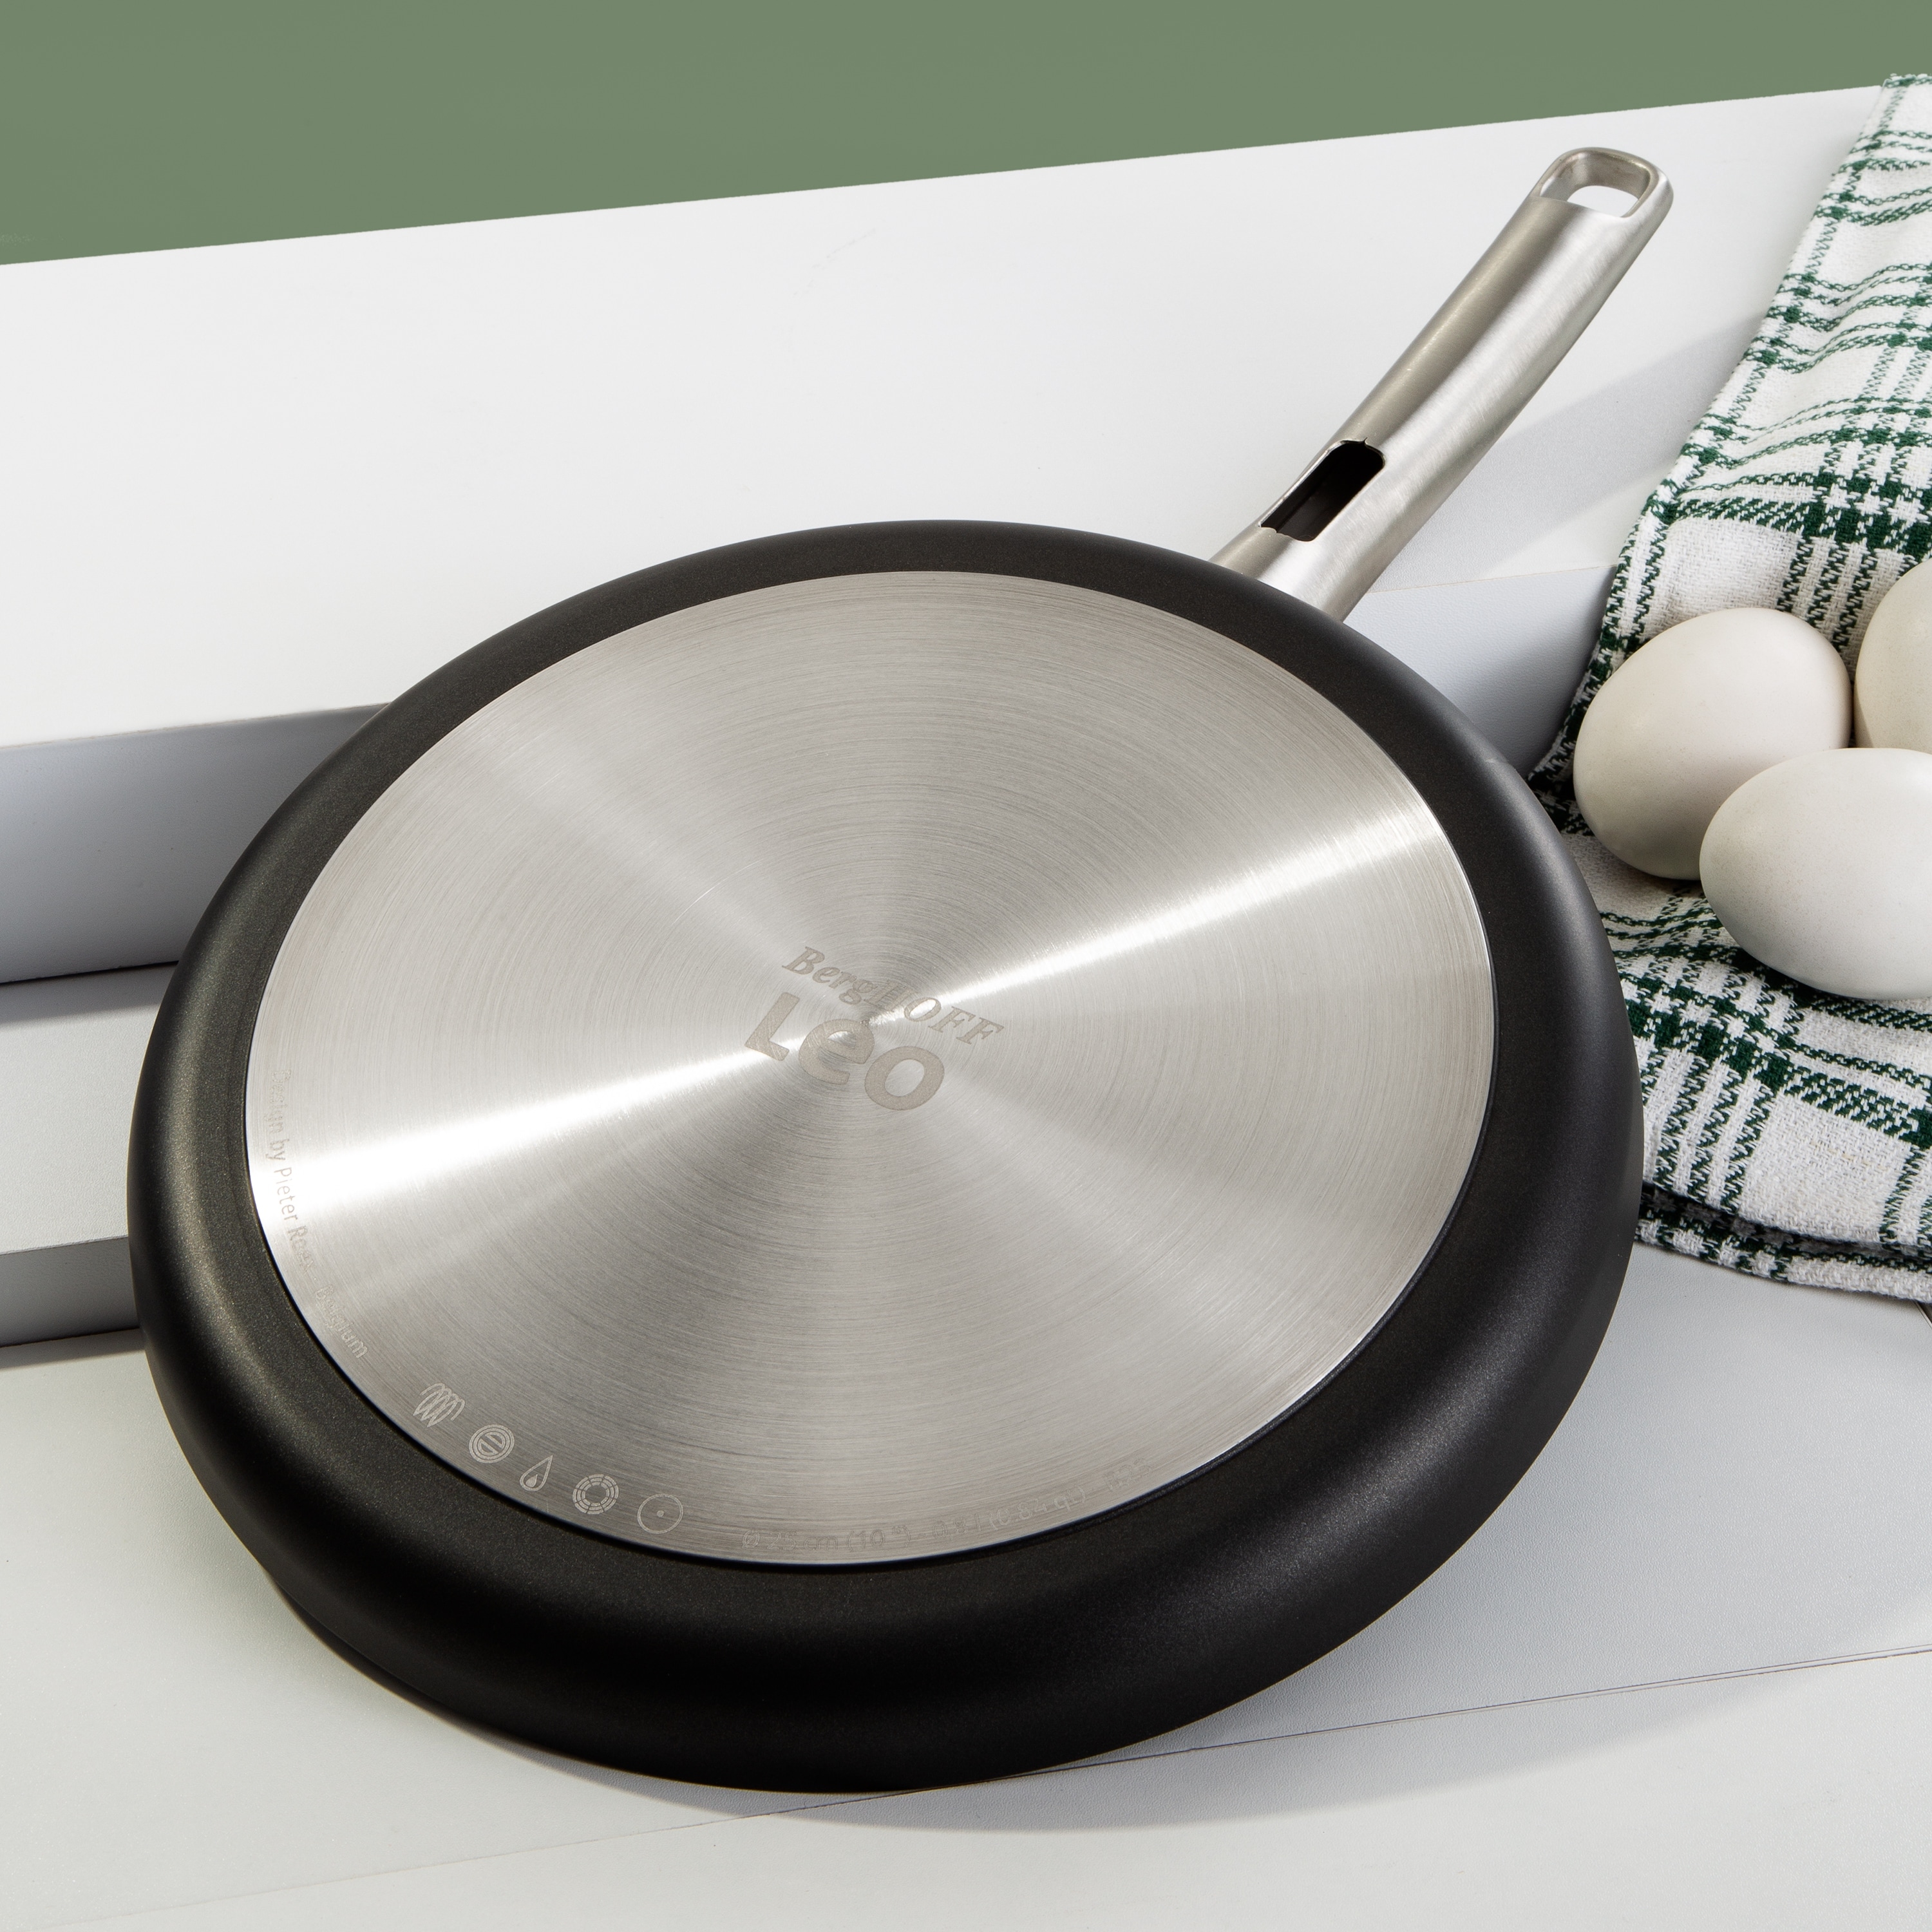 https://ak1.ostkcdn.com/images/products/is/images/direct/33ba827d8b2c77354817b90b48448ea7bf709c77/BergHOFF-Graphite-Non-stick-Ceramic-Omelet-pan-10%22%2C-Sustainable-Recycled-Material.jpg